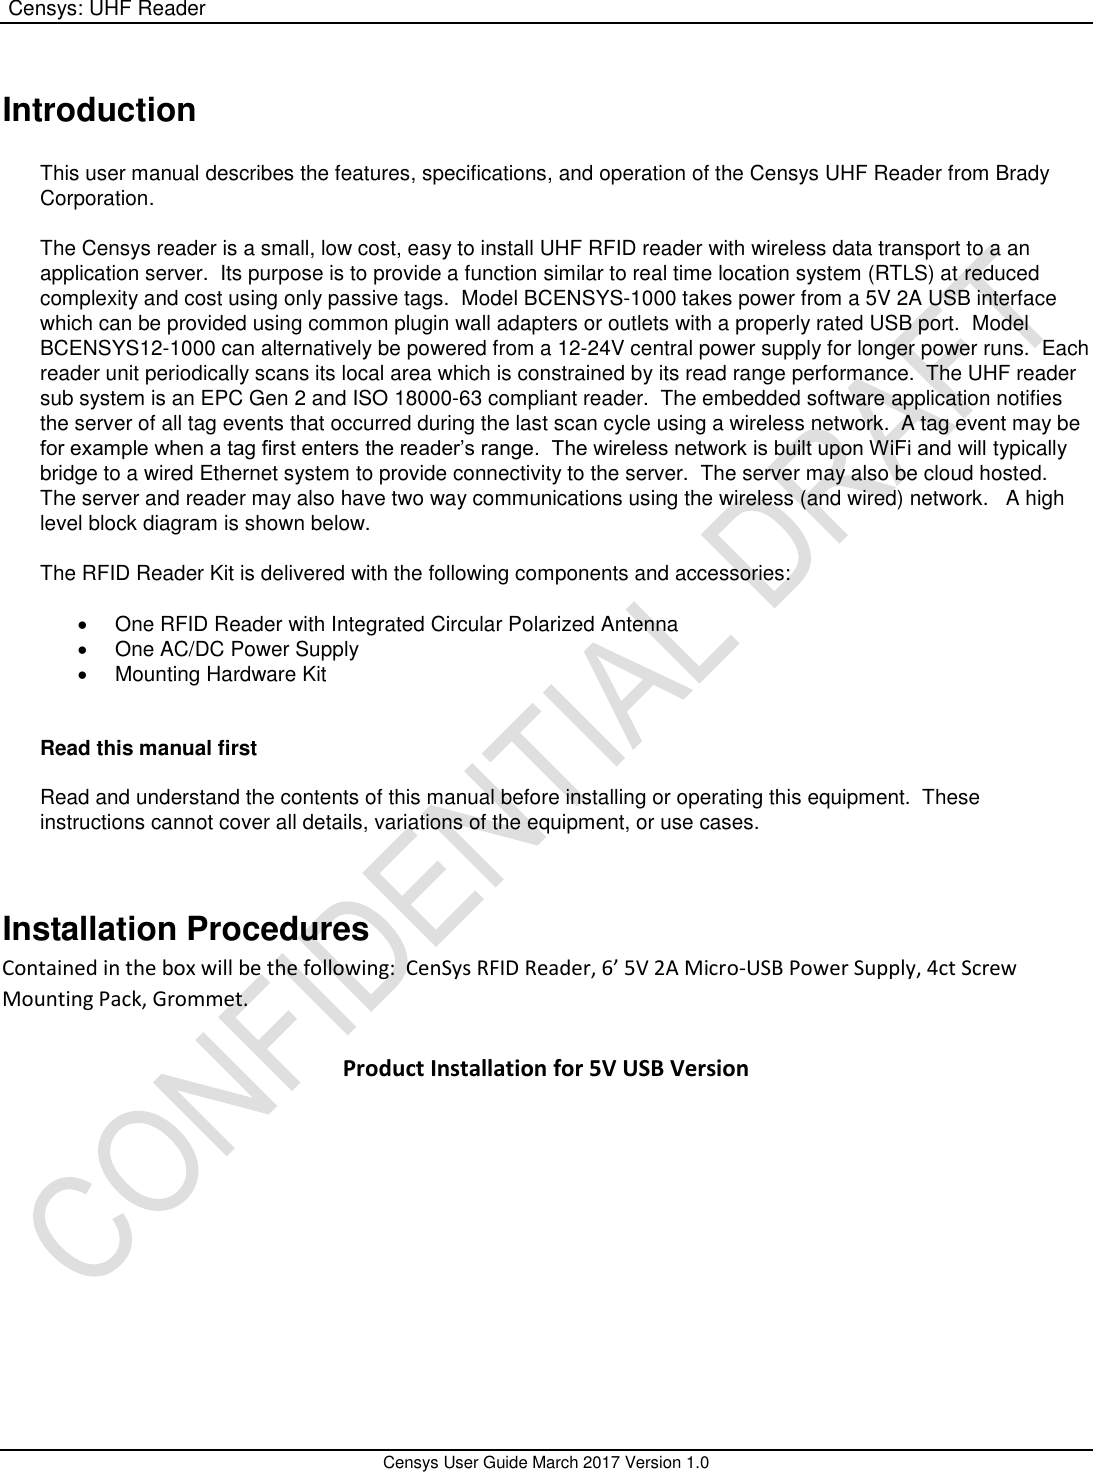  Censys: UHF Reader       Censys User Guide March 2017 Version 1.0  Introduction  This user manual describes the features, specifications, and operation of the Censys UHF Reader from Brady Corporation.  The Censys reader is a small, low cost, easy to install UHF RFID reader with wireless data transport to a an application server.  Its purpose is to provide a function similar to real time location system (RTLS) at reduced complexity and cost using only passive tags.  Model BCENSYS-1000 takes power from a 5V 2A USB interface which can be provided using common plugin wall adapters or outlets with a properly rated USB port.  Model BCENSYS12-1000 can alternatively be powered from a 12-24V central power supply for longer power runs.  Each reader unit periodically scans its local area which is constrained by its read range performance.  The UHF reader sub system is an EPC Gen 2 and ISO 18000-63 compliant reader.  The embedded software application notifies the server of all tag events that occurred during the last scan cycle using a wireless network.  A tag event may be for example when a tag first enters the reader’s range.  The wireless network is built upon WiFi and will typically bridge to a wired Ethernet system to provide connectivity to the server.  The server may also be cloud hosted.  The server and reader may also have two way communications using the wireless (and wired) network.   A high level block diagram is shown below.  The RFID Reader Kit is delivered with the following components and accessories:    One RFID Reader with Integrated Circular Polarized Antenna   One AC/DC Power Supply   Mounting Hardware Kit   Read this manual first  Read and understand the contents of this manual before installing or operating this equipment.  These instructions cannot cover all details, variations of the equipment, or use cases.     Installation Procedures Contained in the box will be the following:  CenSys RFID Reader, 6’ 5V 2A Micro-USB Power Supply, 4ct Screw Mounting Pack, Grommet. Product Installation for 5V USB Version 